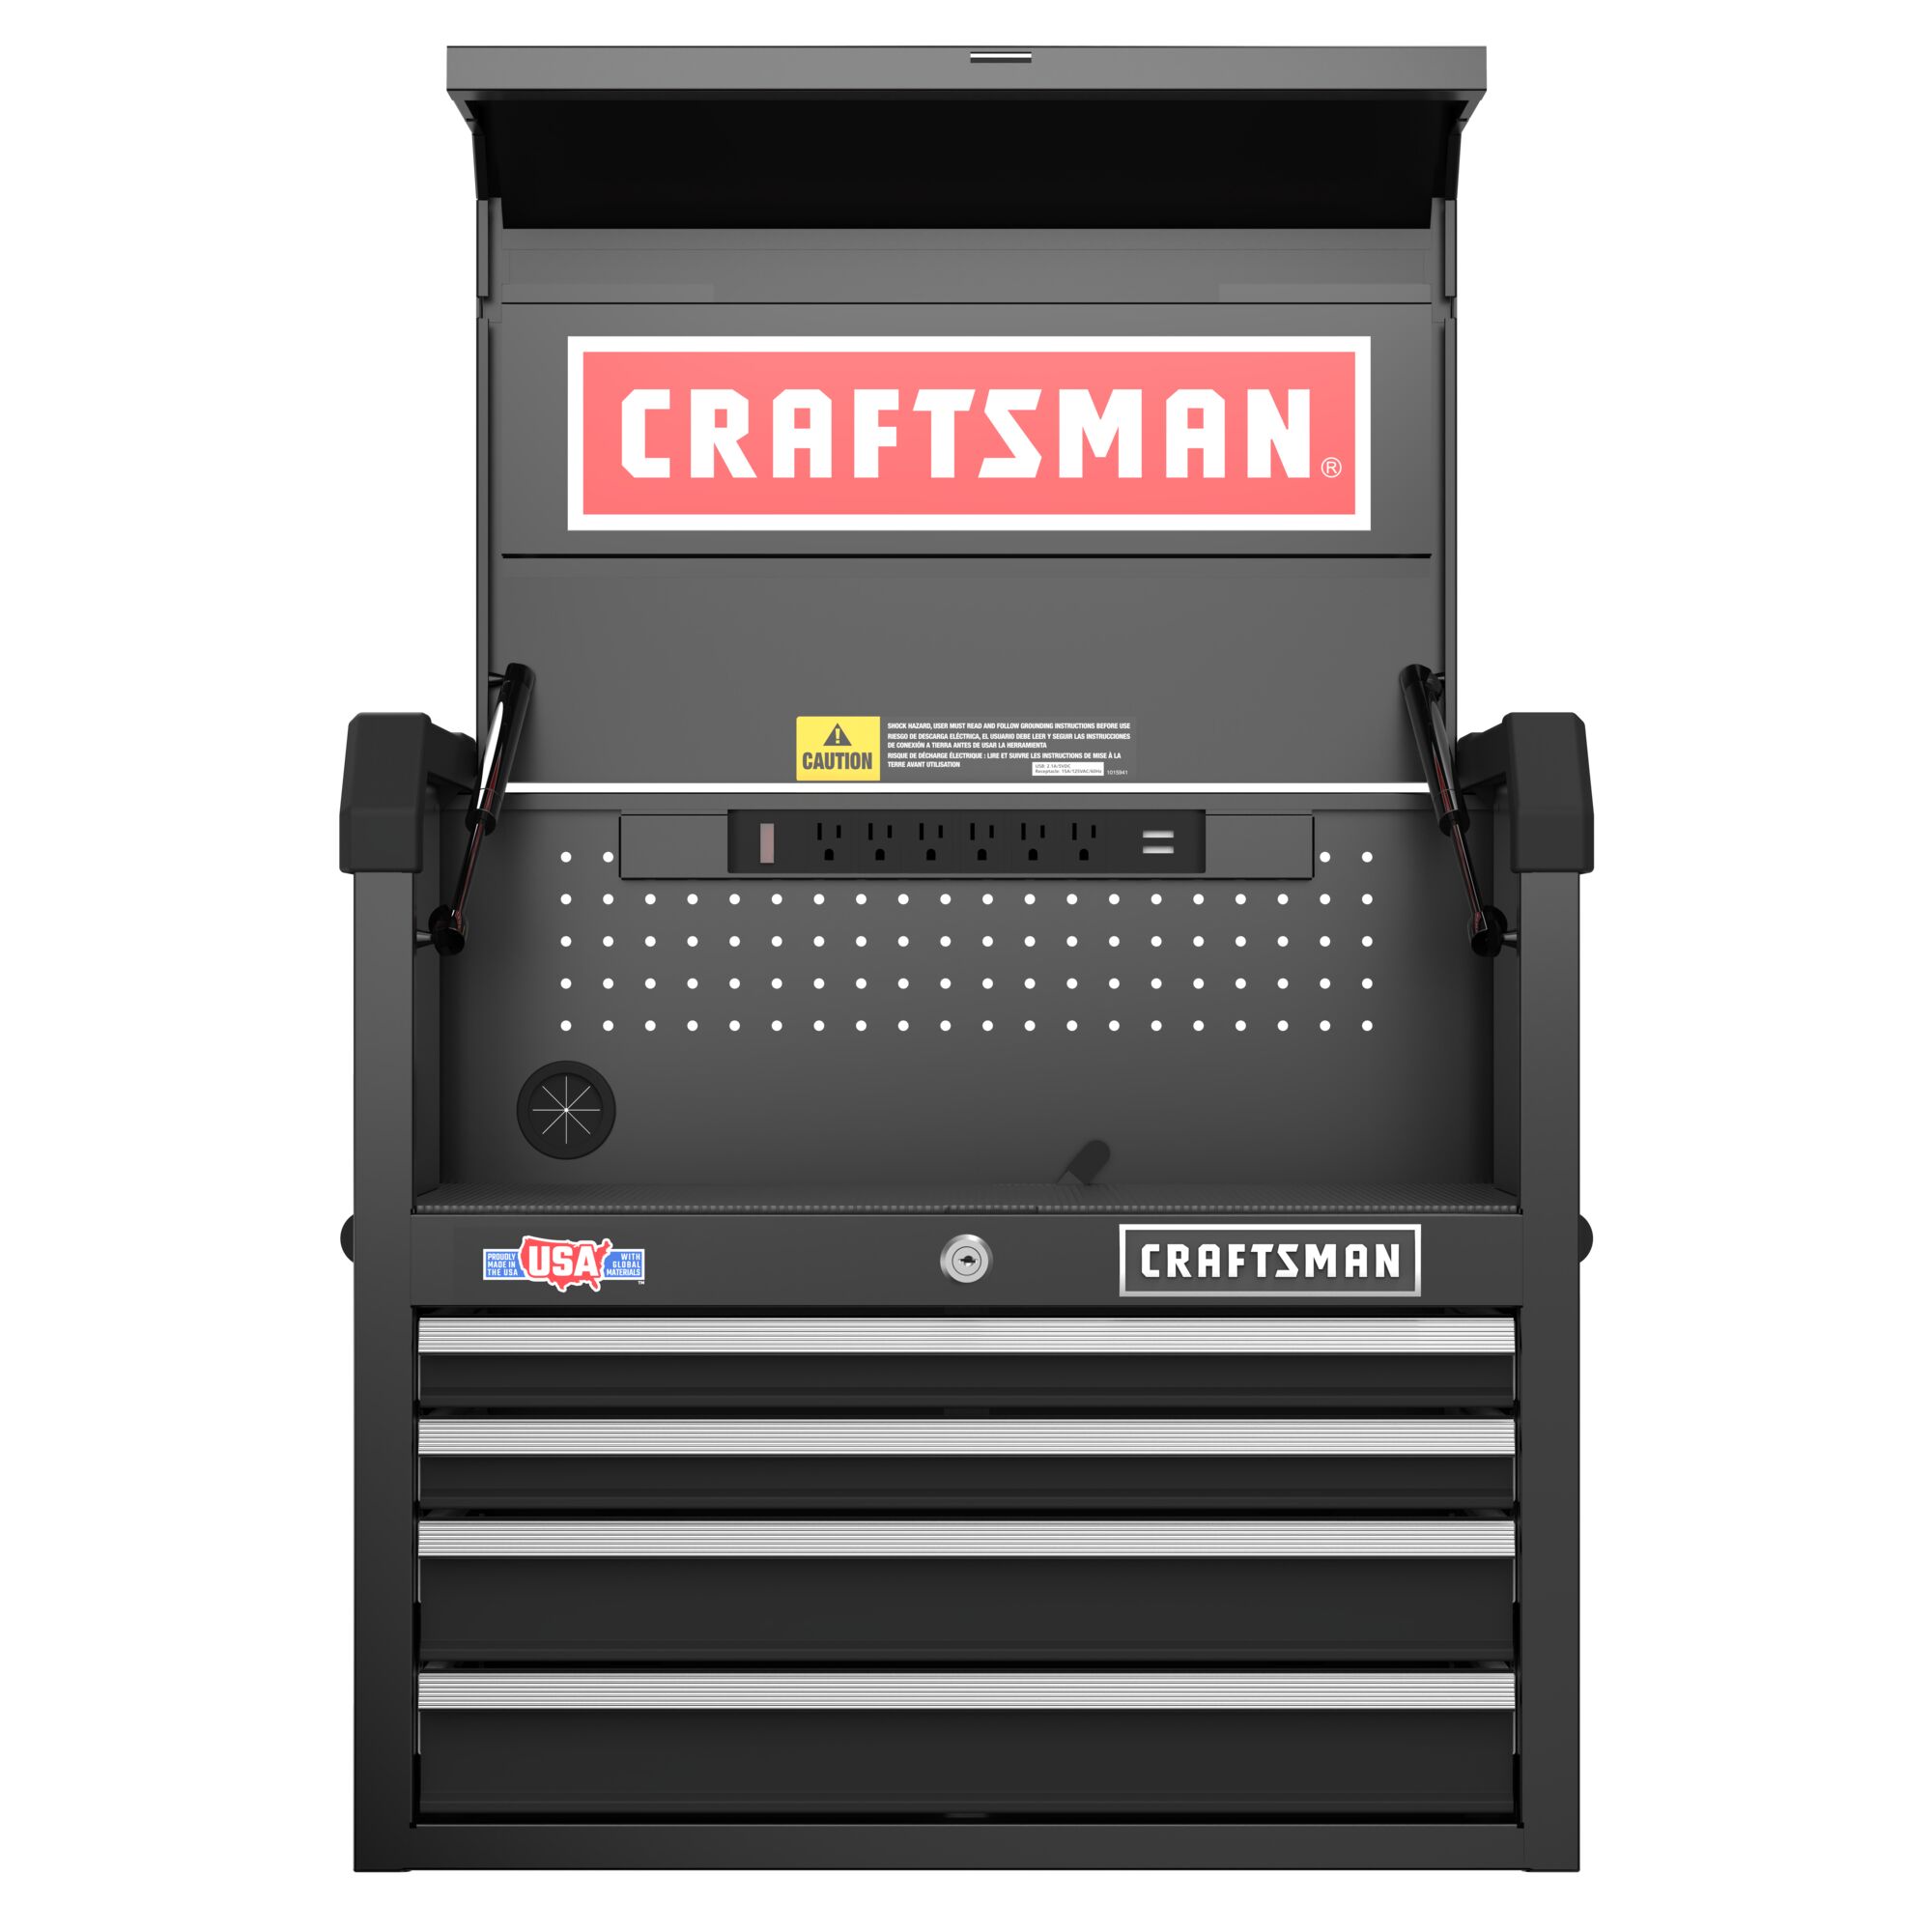 View of CRAFTSMAN Storage: Cabinets & Chests Rolling on white background